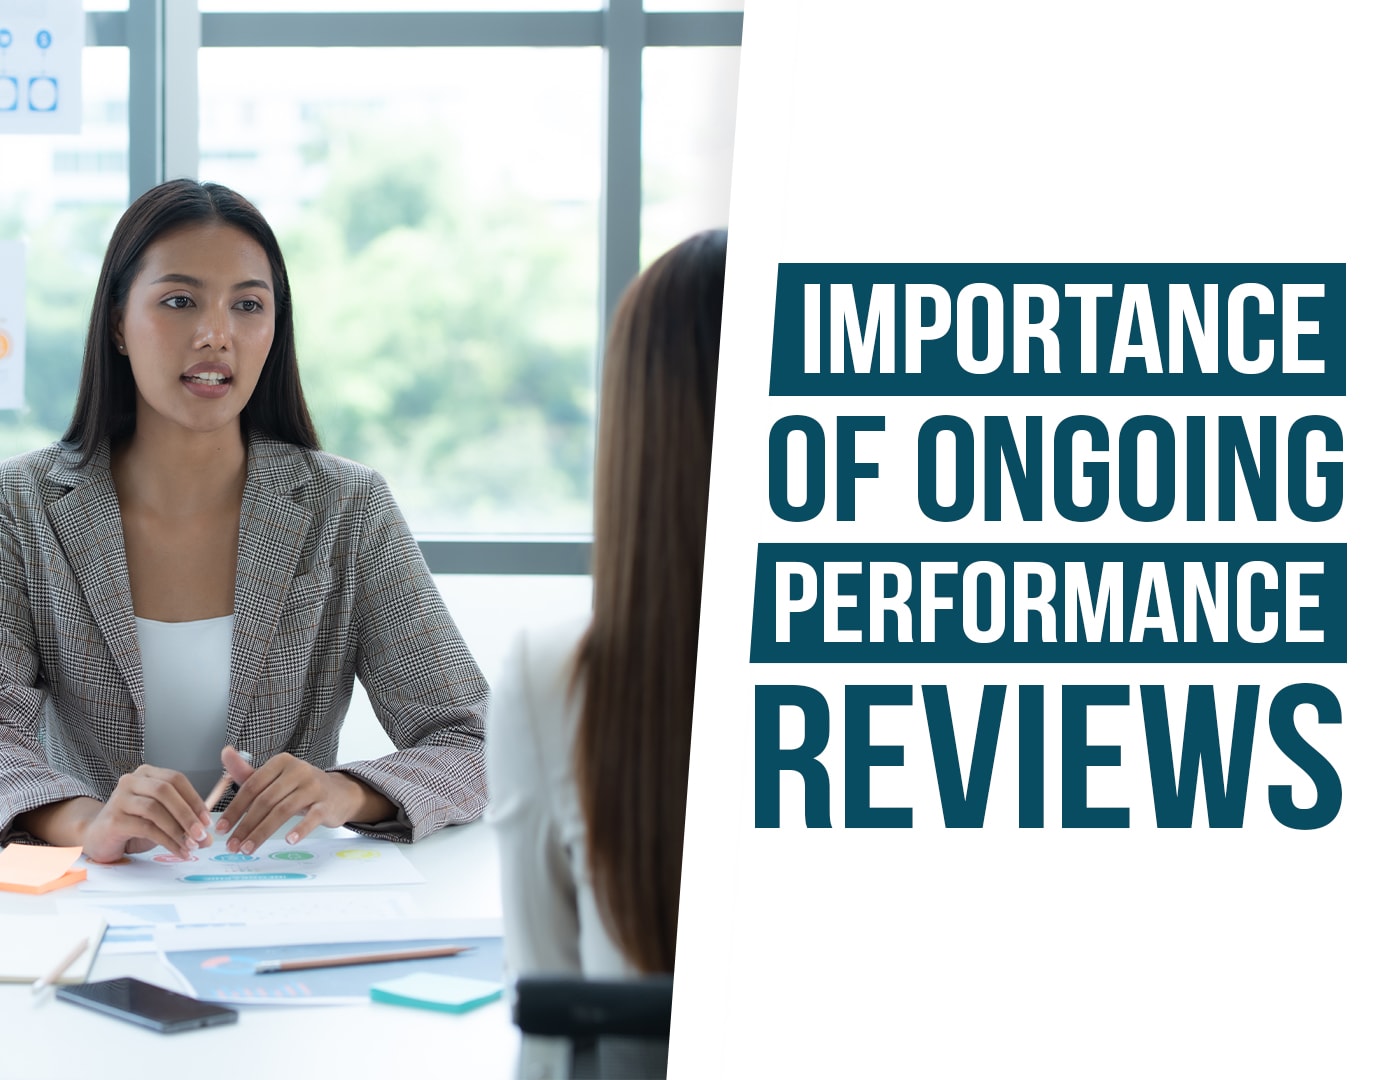 Importance of ongoing performance reviews